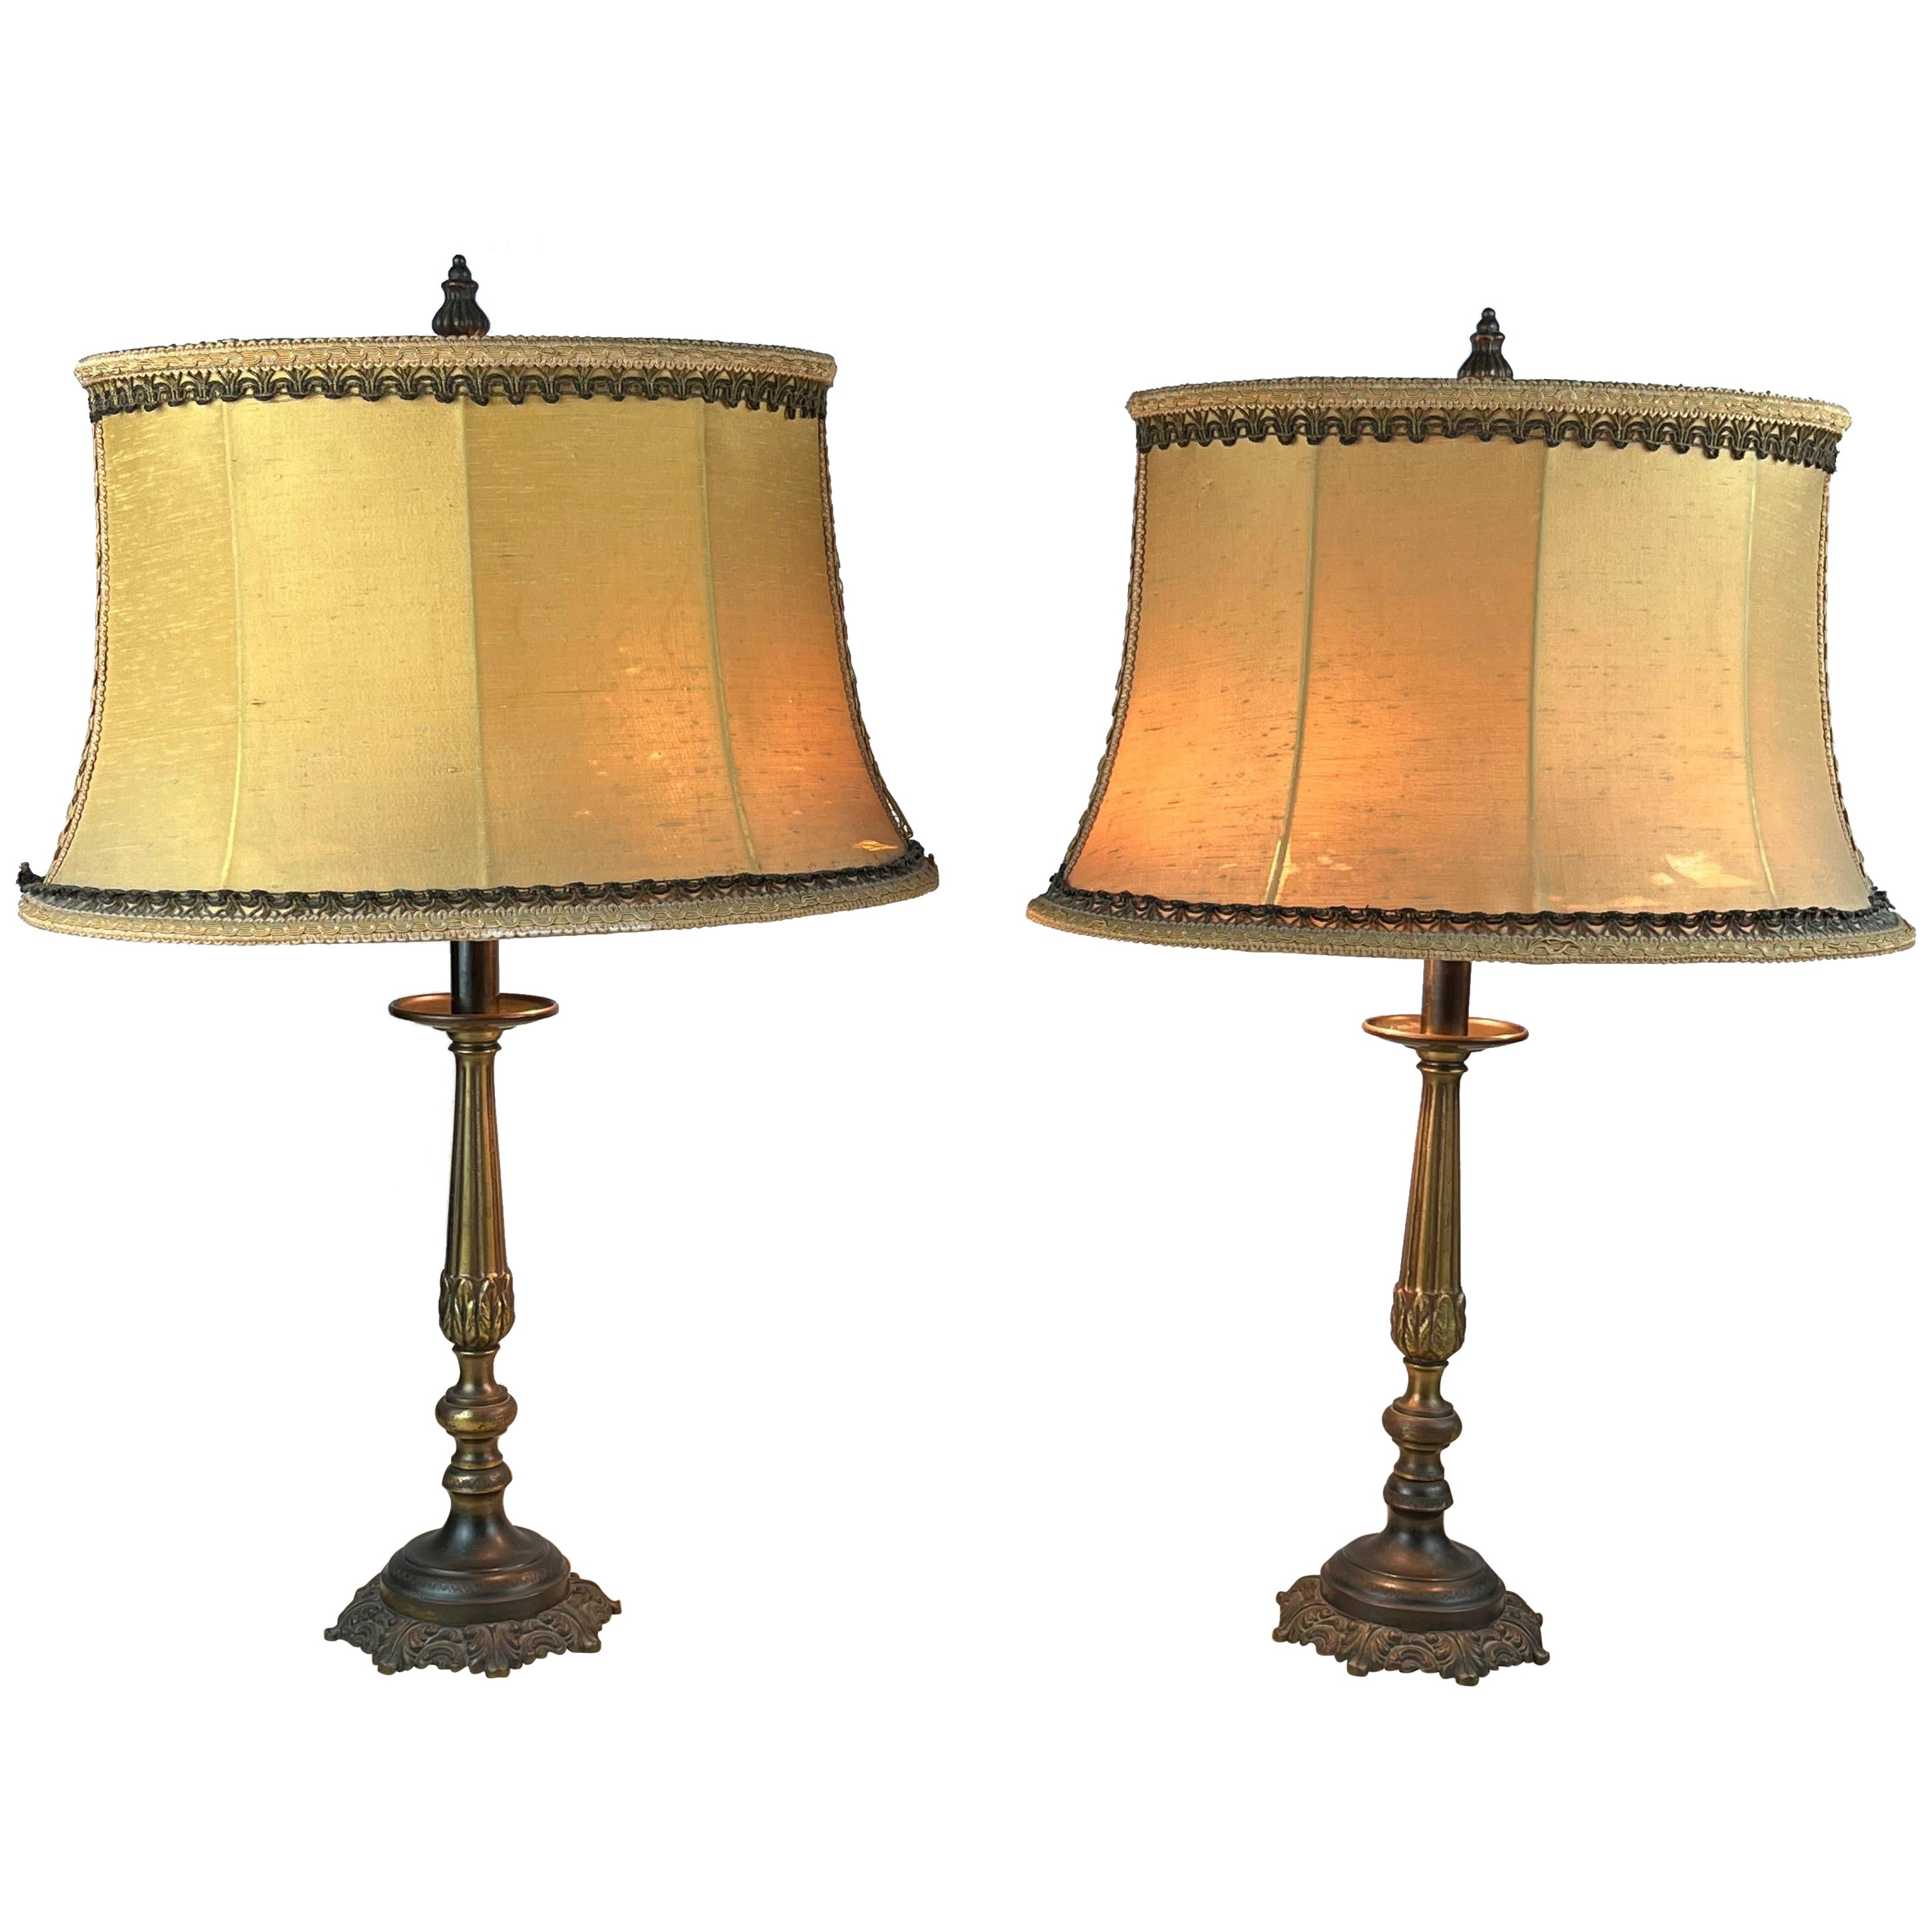 Pair of Bronze Table/Bedside Lamps, Italy, 1940s